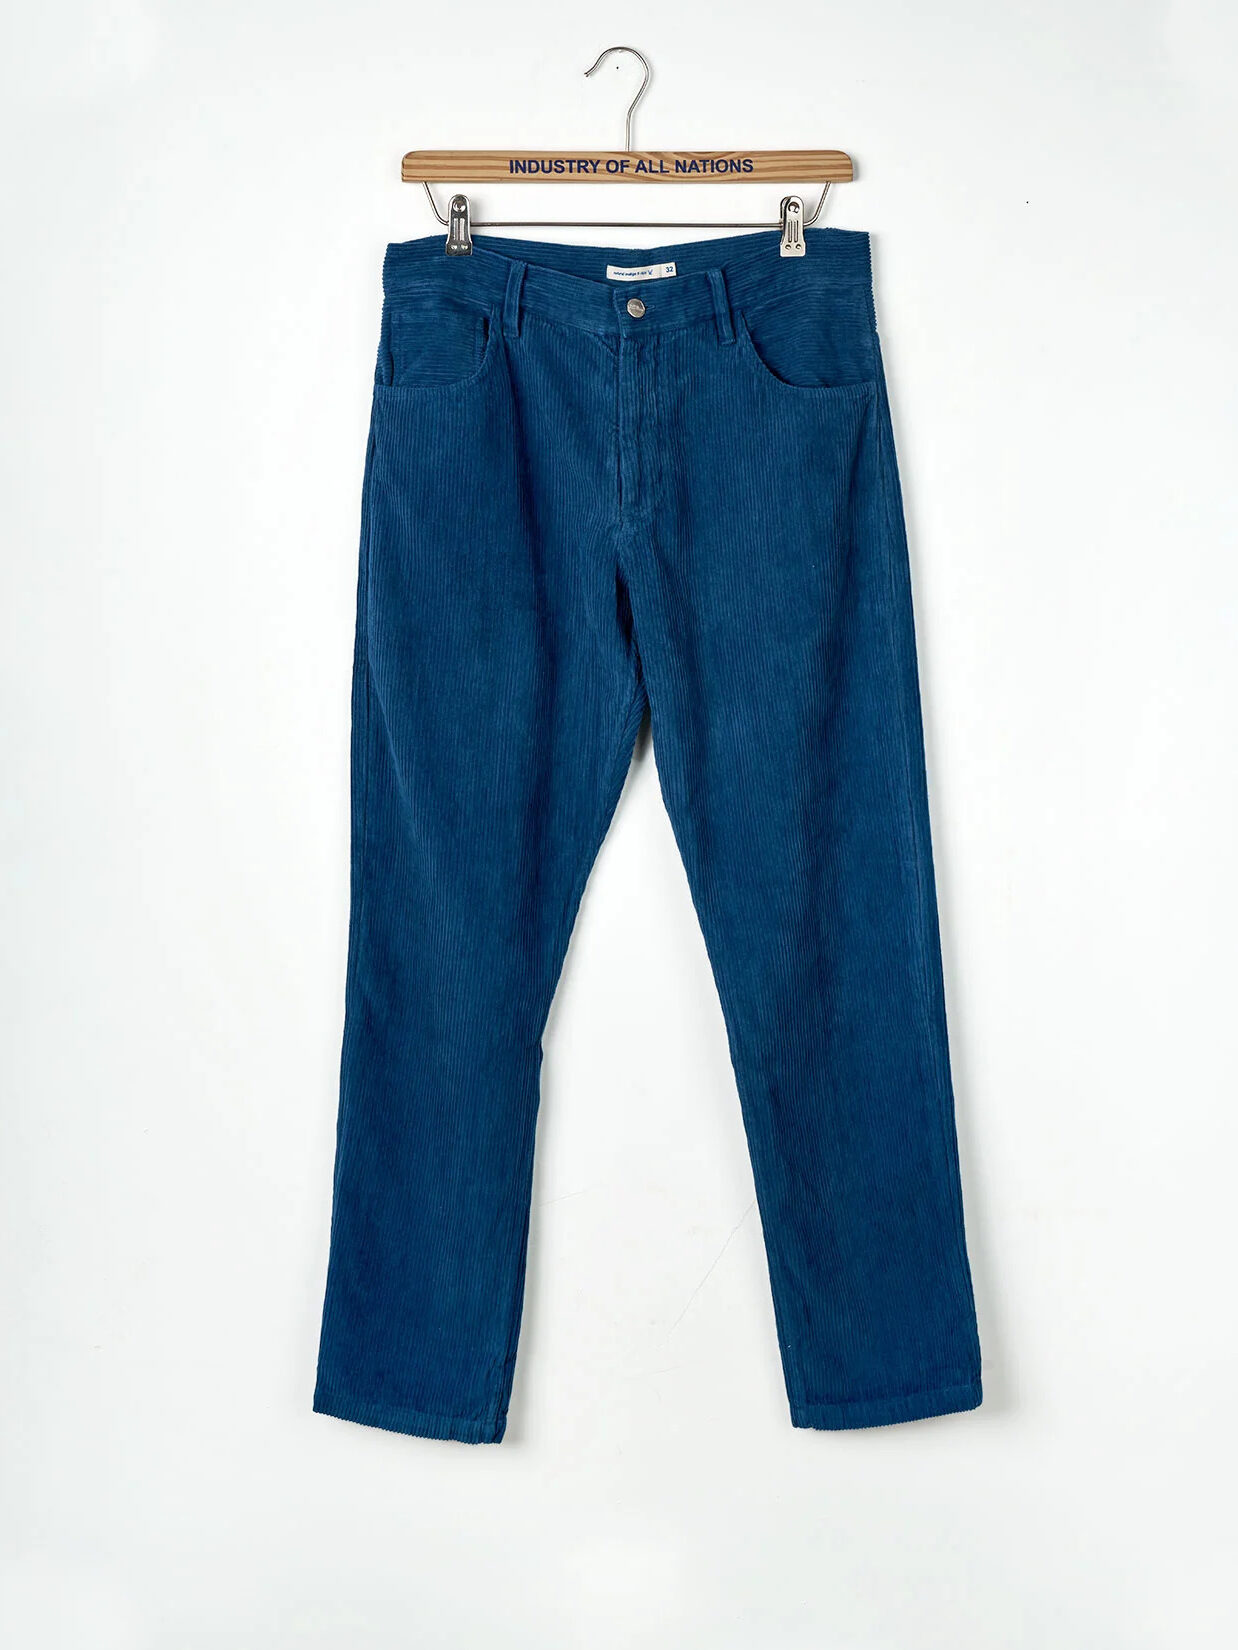 Industry Of All Nations Corduroy Pants